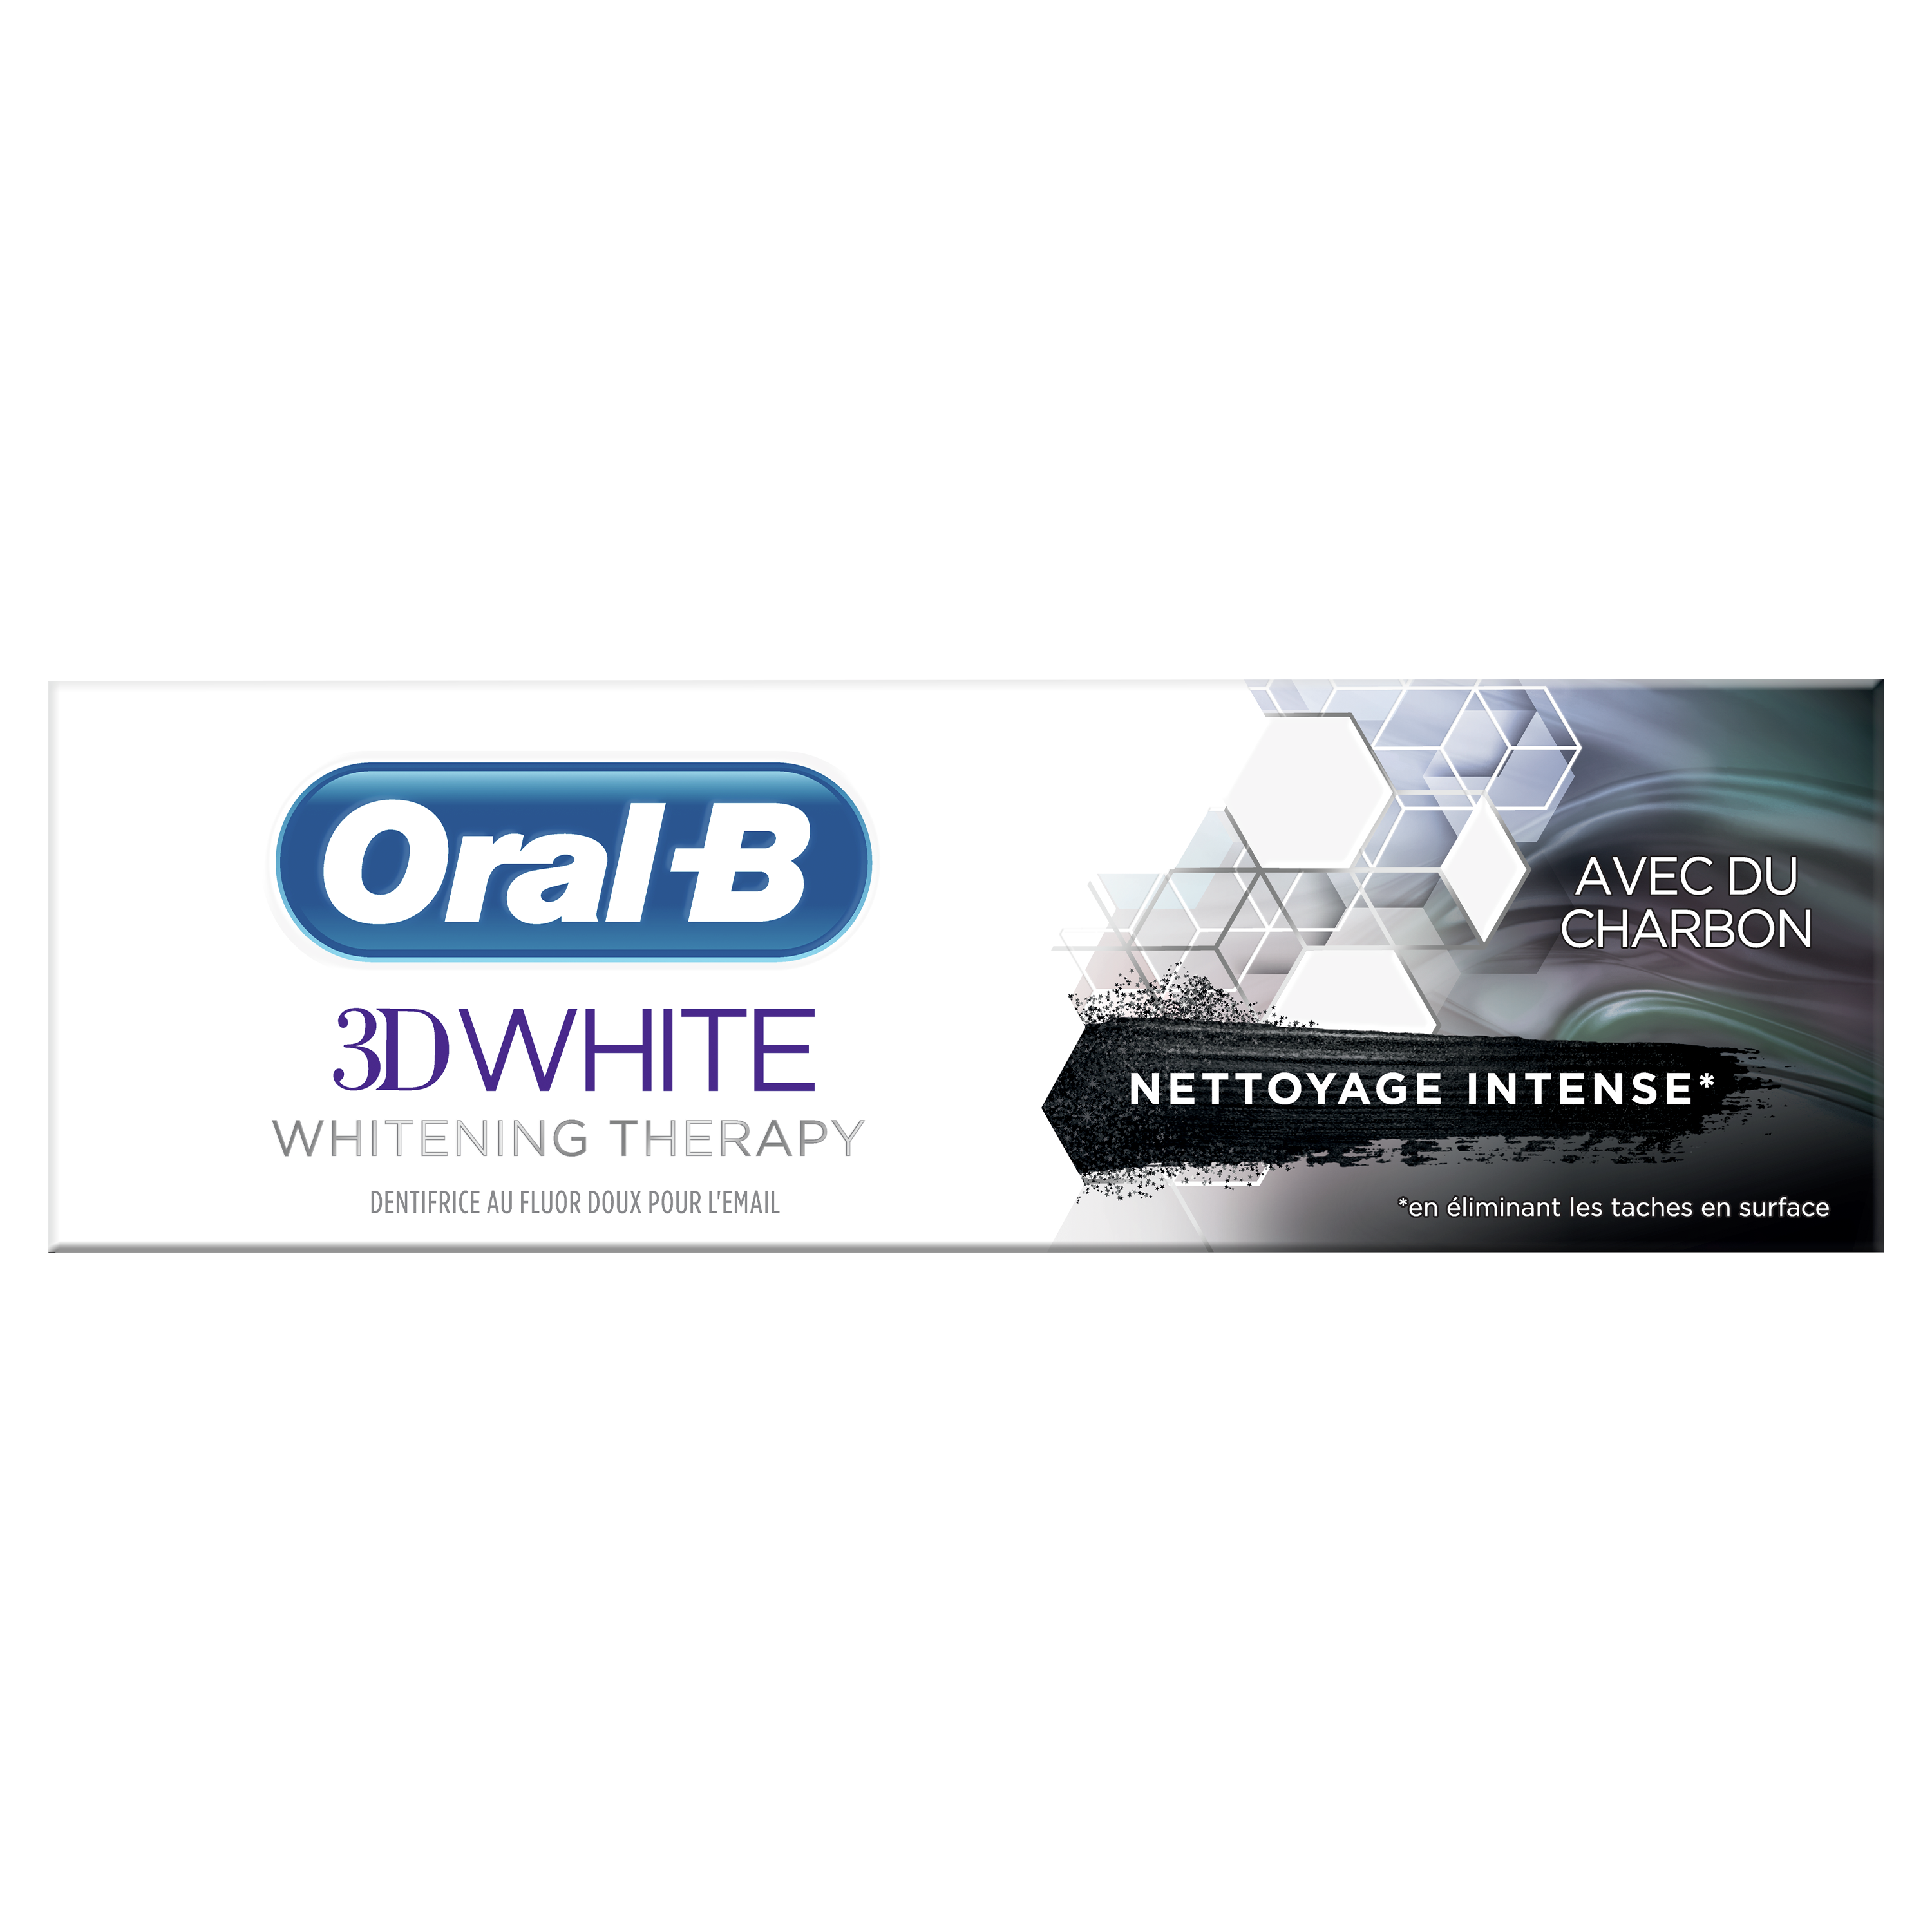 Oral-B 3D White Whitening Therapy Nettoyage Intense Dentifrice undefined